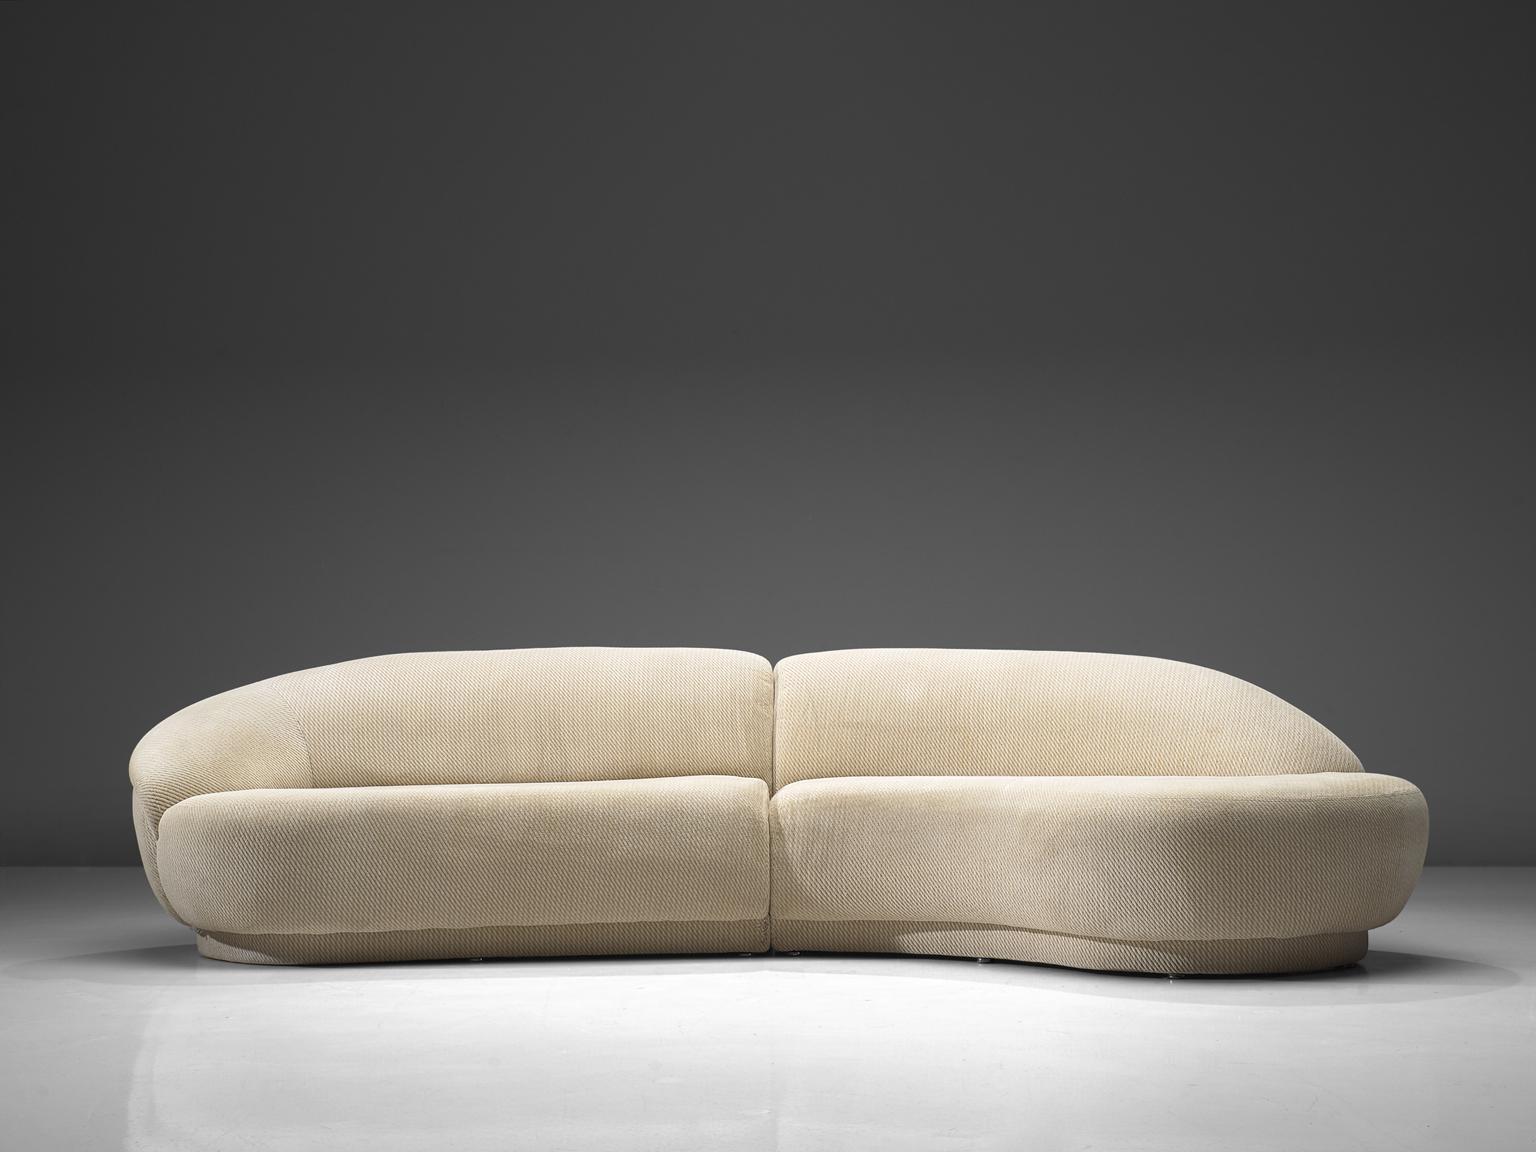 Milo Baughman for Thayer-Coggin, two-piece serpentine sectional curved sofa, United States, 1970s.

This outstanding Milo Baughman two-piece serpentine sectional curved sofa is a wonderful example of Baughman's design skills. With its bulky round